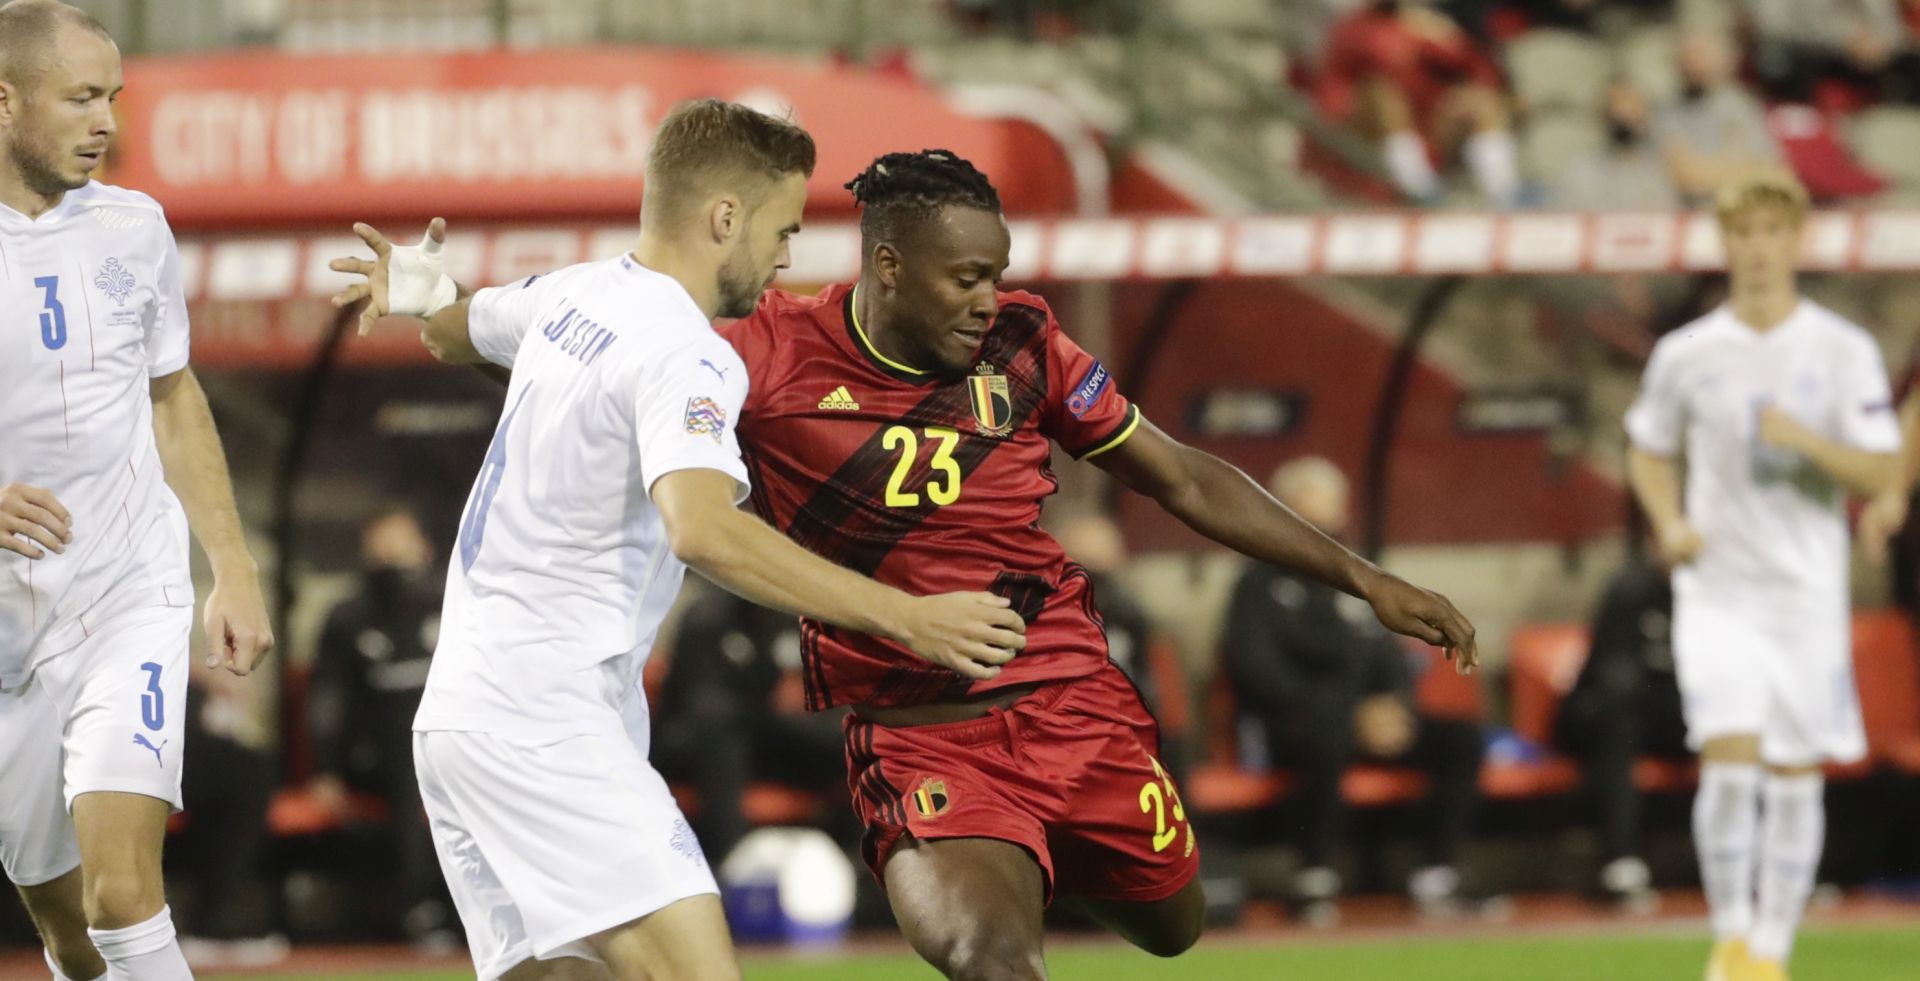 epa08655069 Belgium player Michy Batshuayi fights for the ball with Iceland player Holmar Eyjolfsson (L) during Nations league soccer match Between Belgium and Iceland at King Baudouin stadium in Brussels, Belgium, 08 September 2020.  EPA/OLIVIER HOSLET